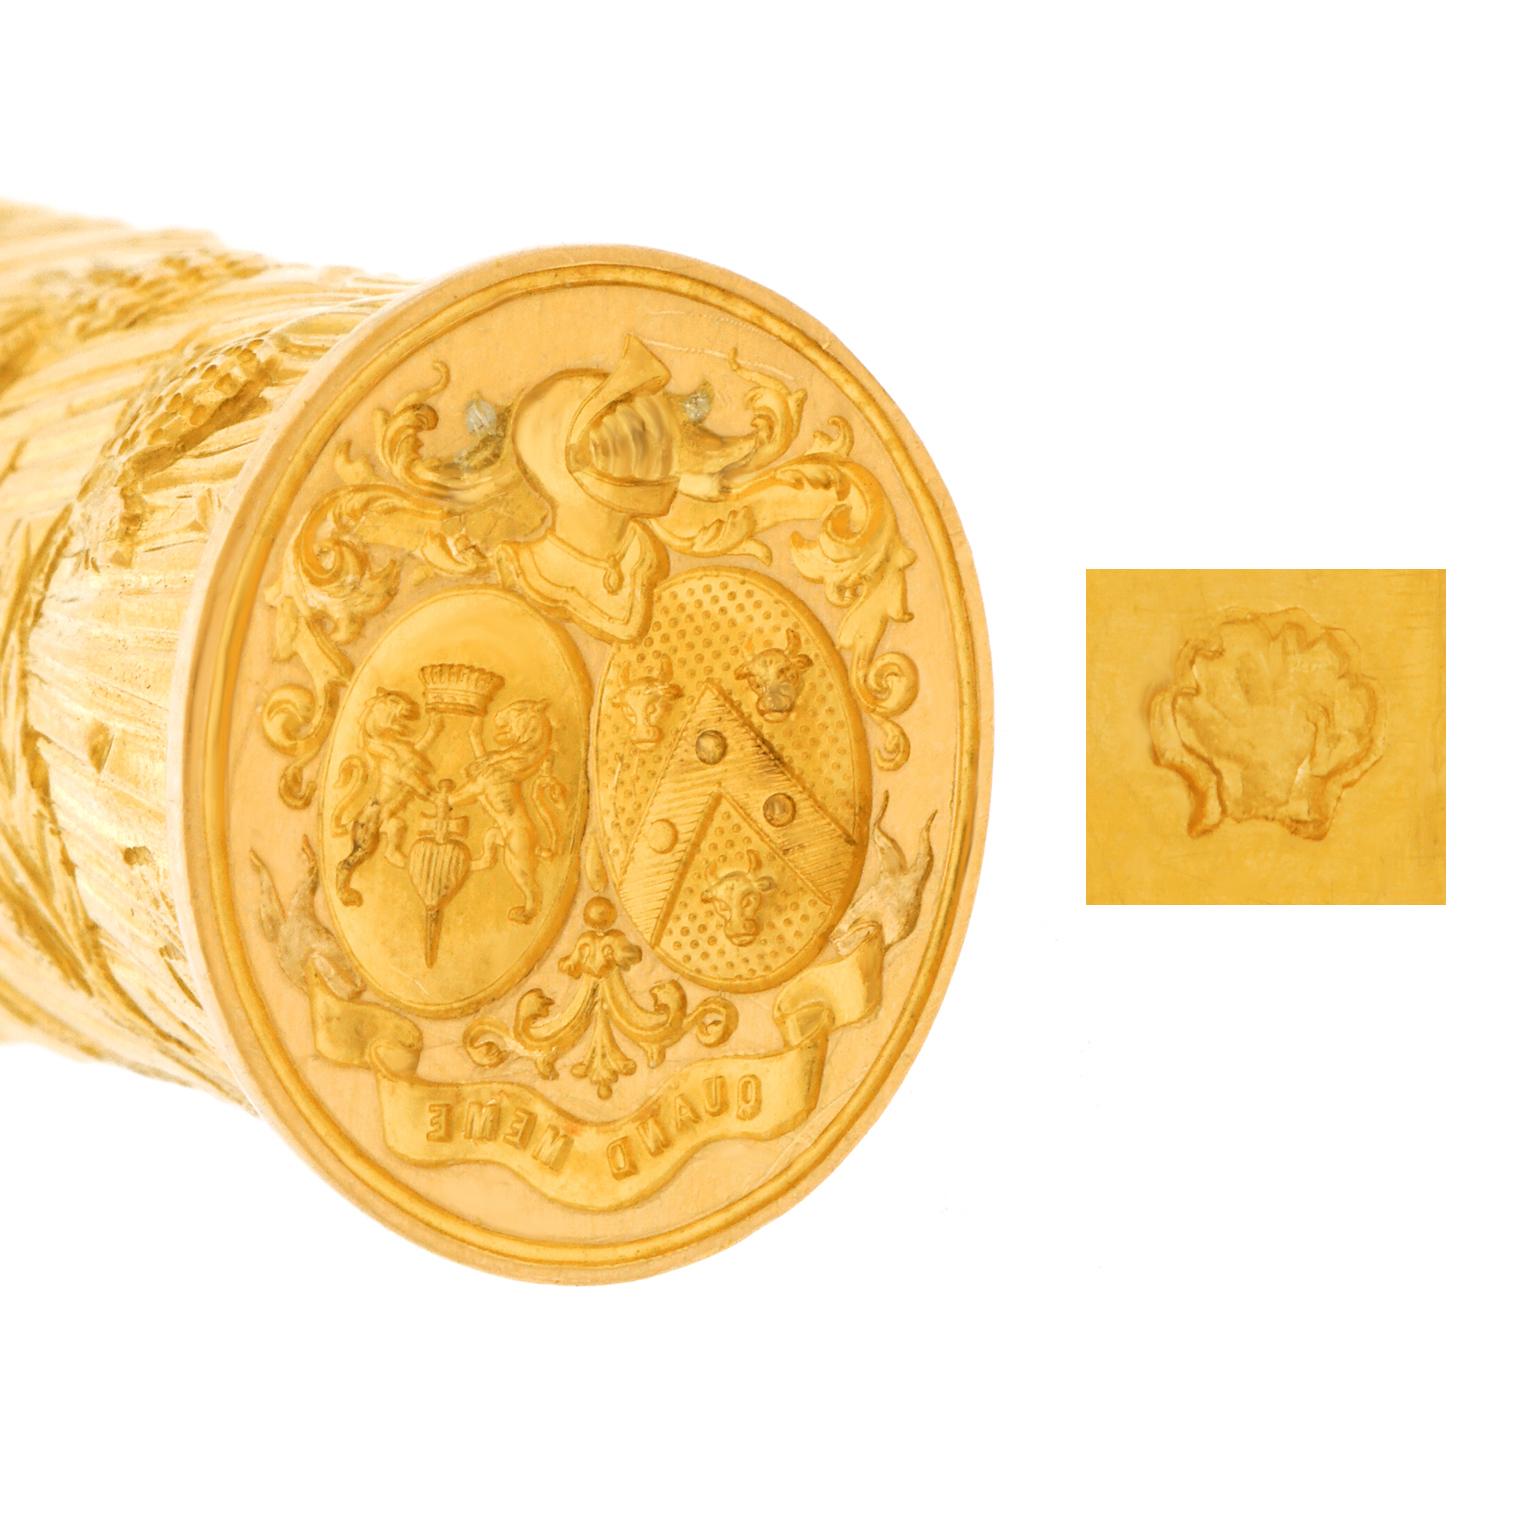 George III Gold Seal and Sealing Wax Holder circa 1780s-1790s Provence, France